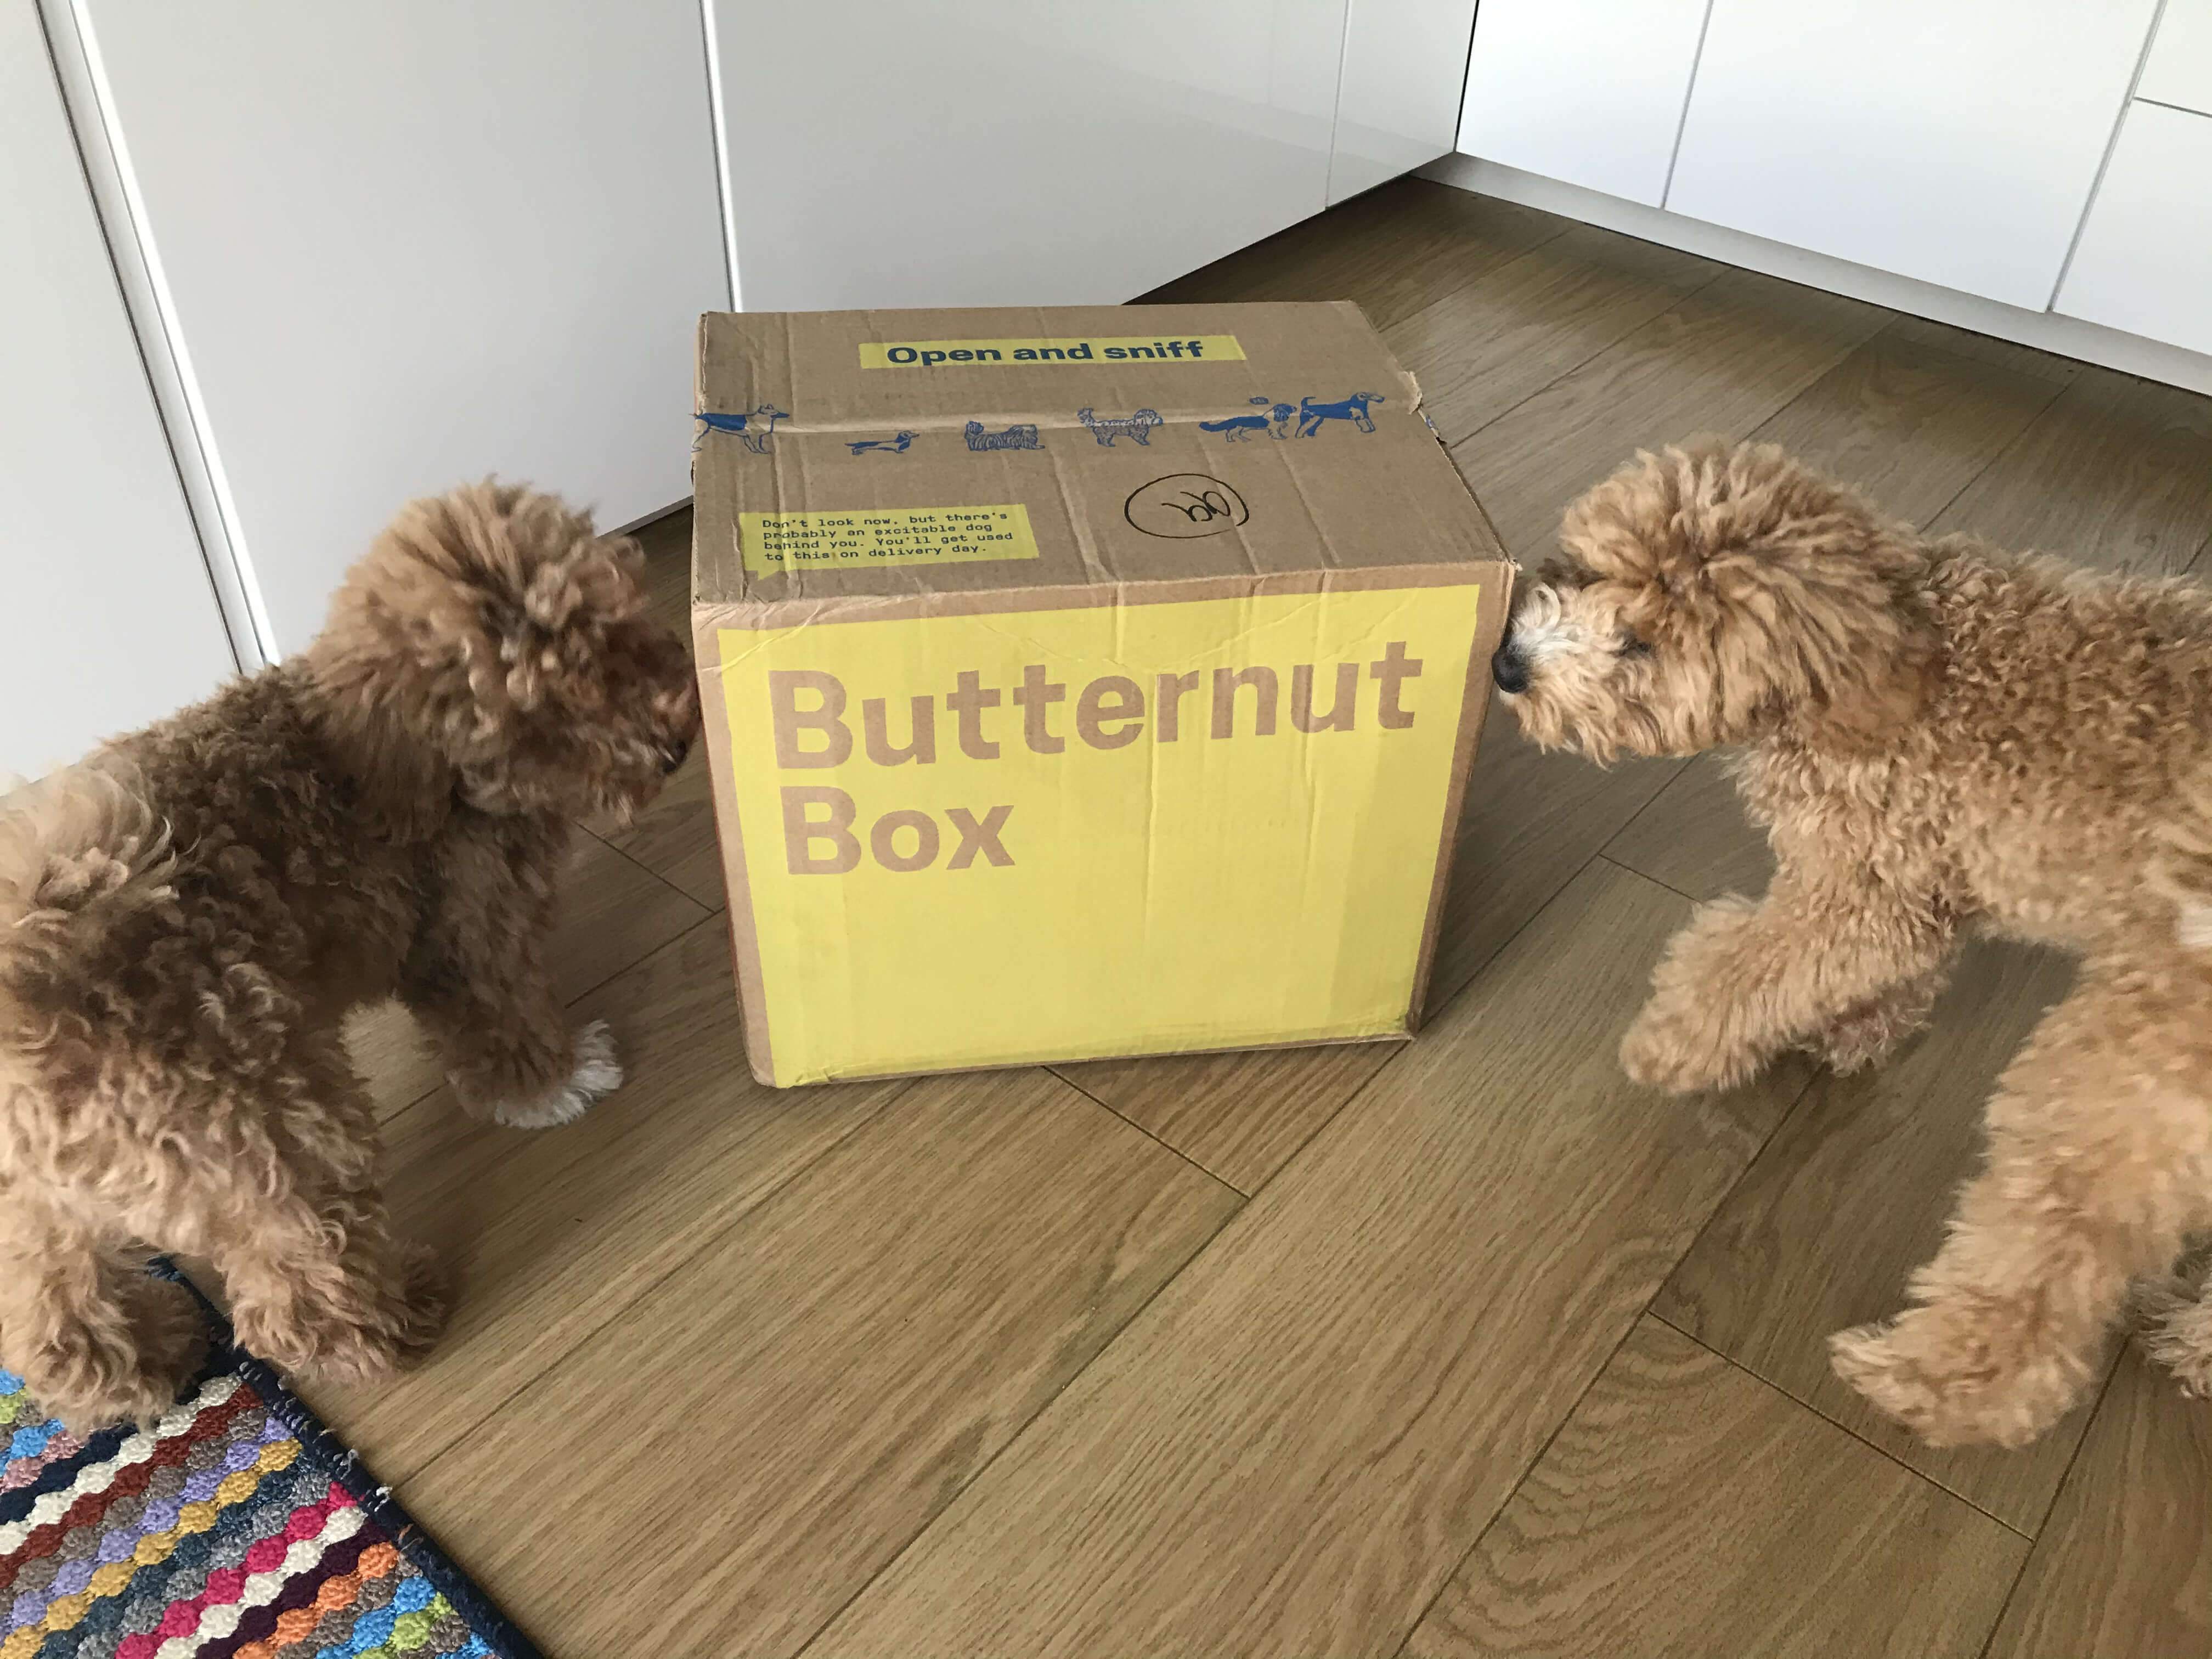 Two dogs and a box of dog food